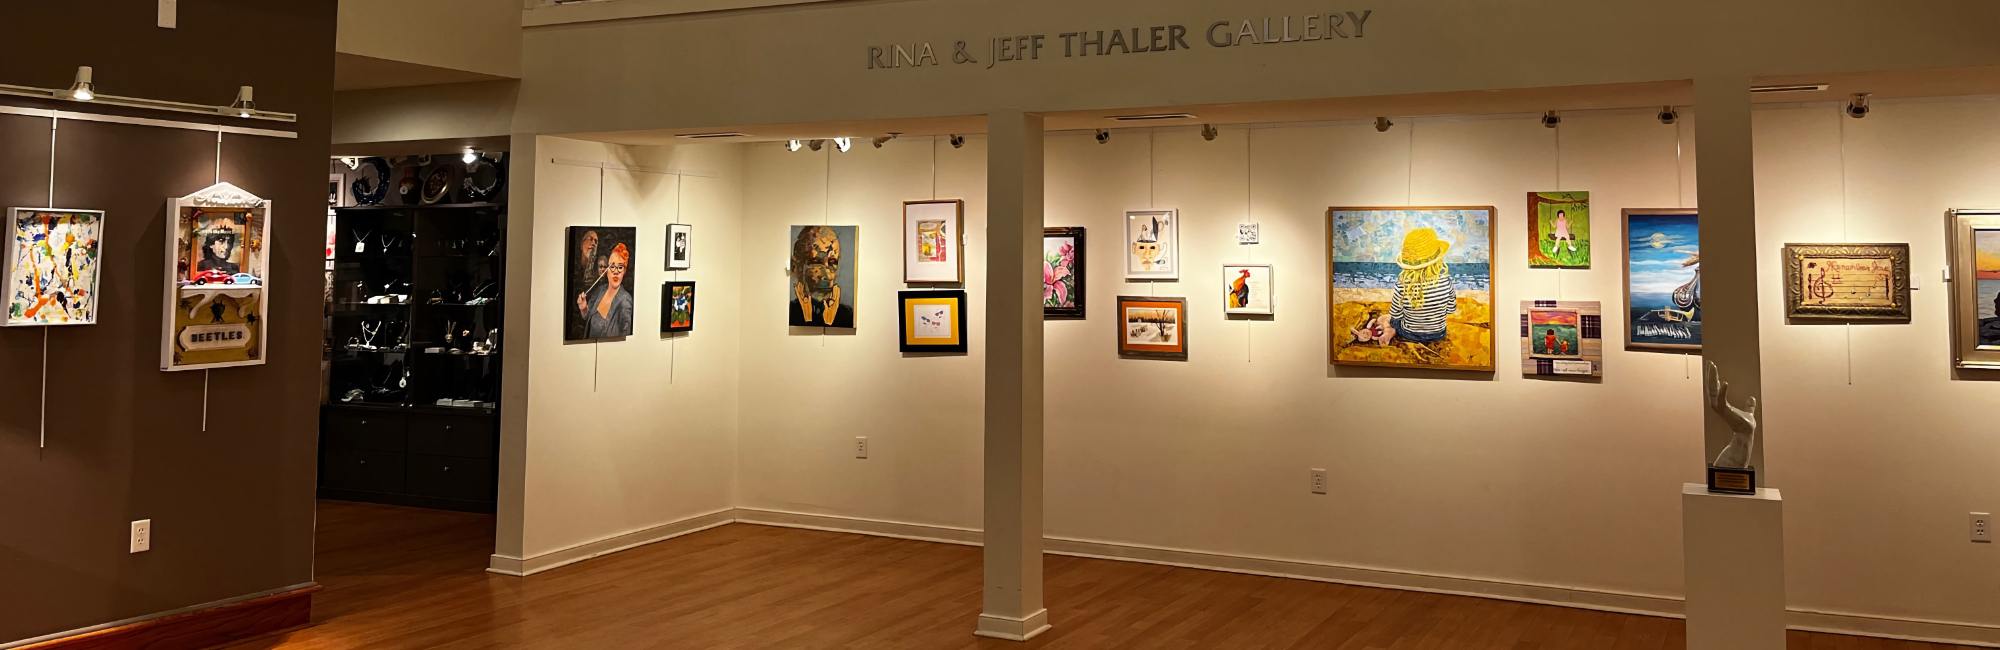 Featured in the Thaler Gallery / "Memories: Storytelling Through Art"